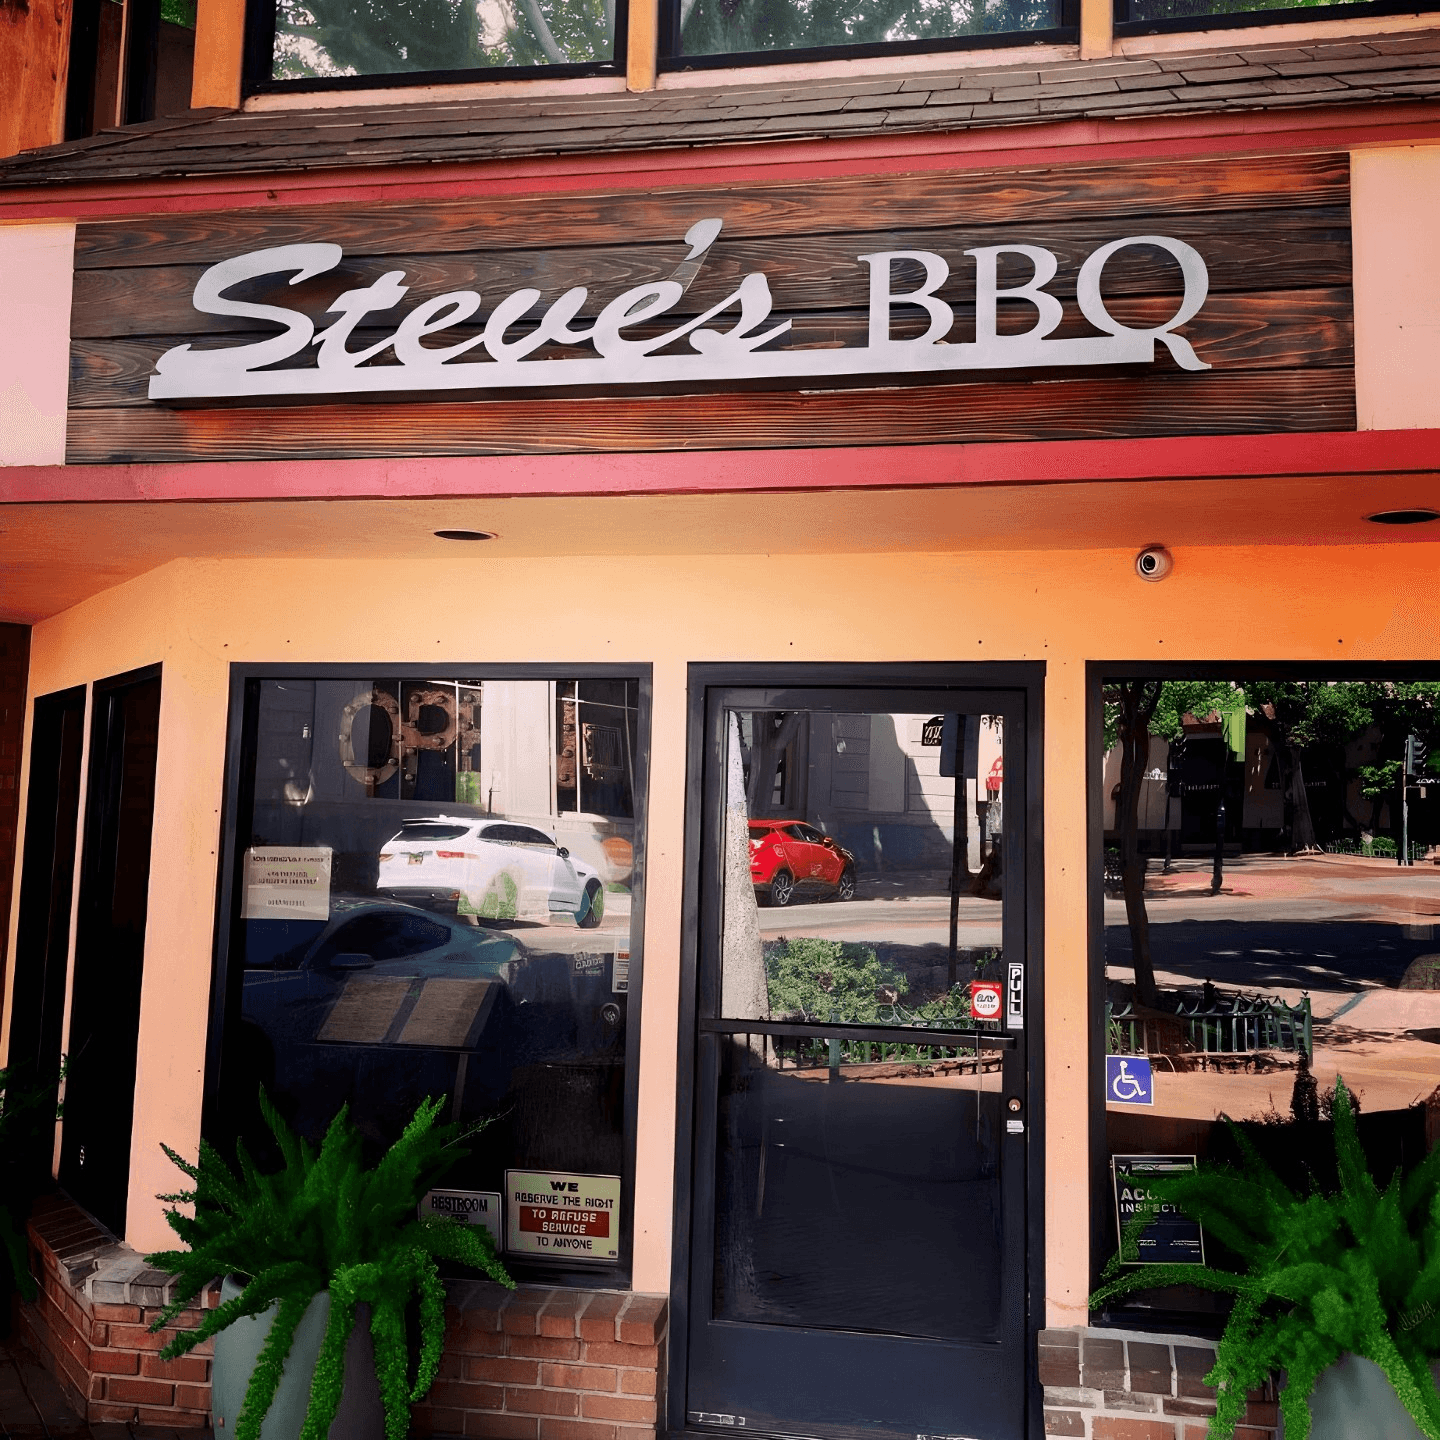 Welcome to the smokin' world of Steve's BBQ!